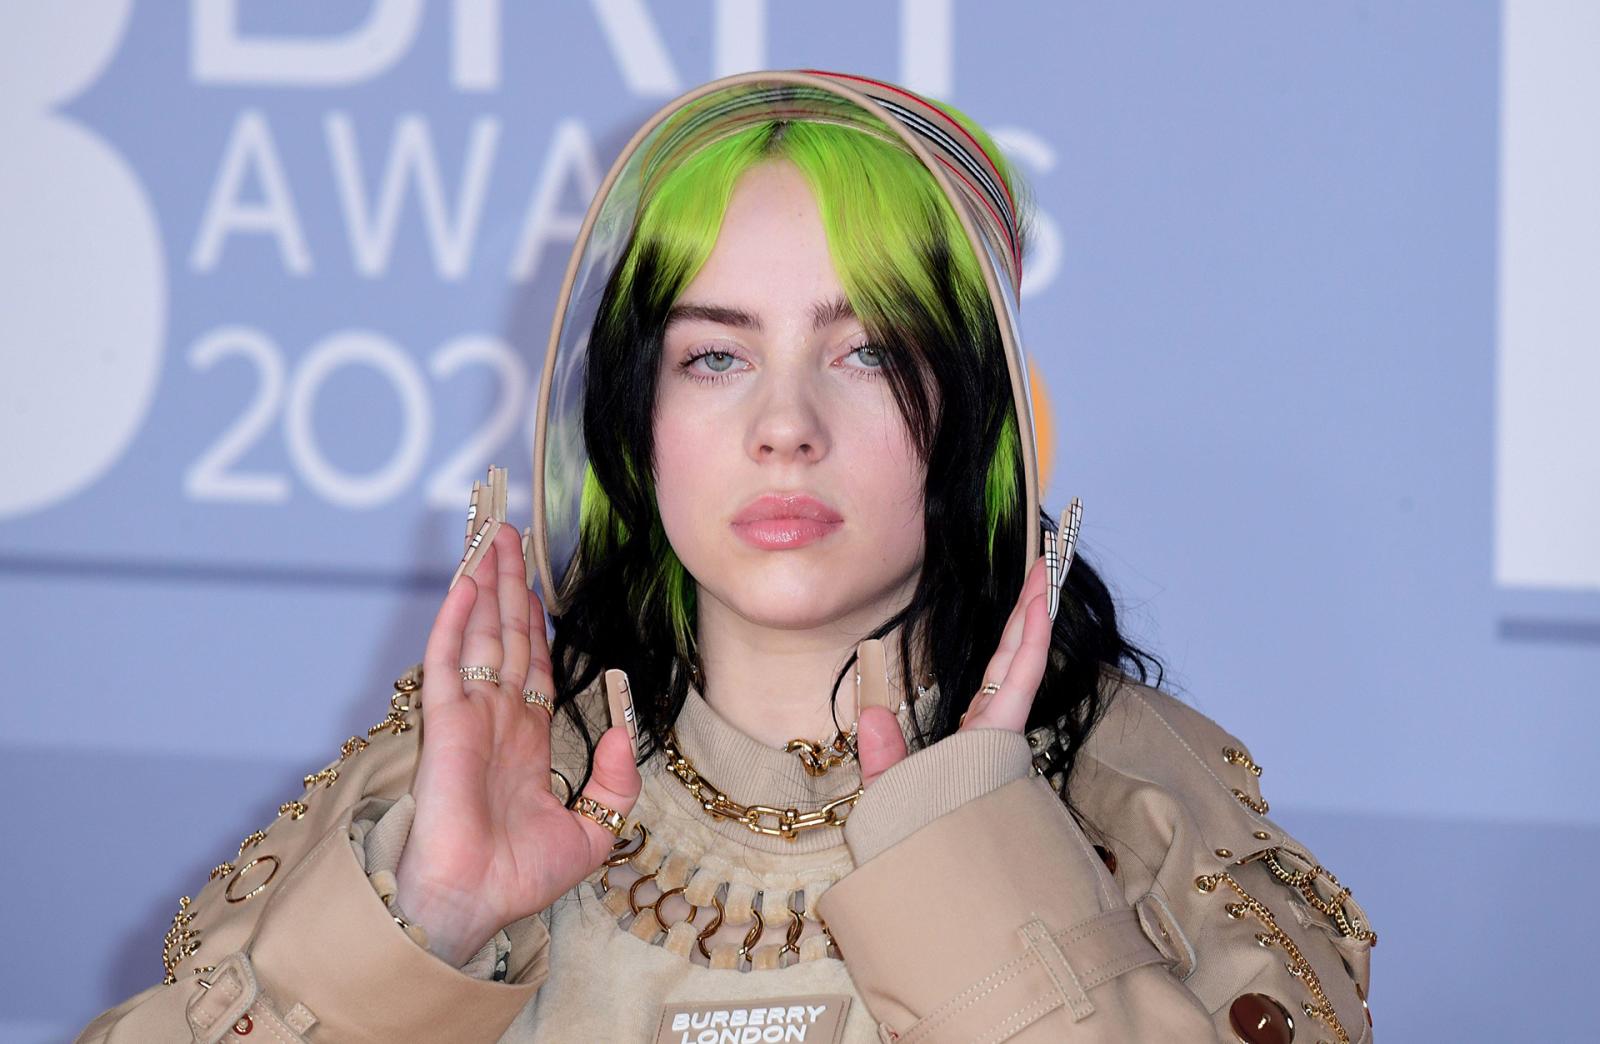 From Blue to Green: 6 Celebrity Hair Transformations That Will Make Your Jaw Drop - image 2